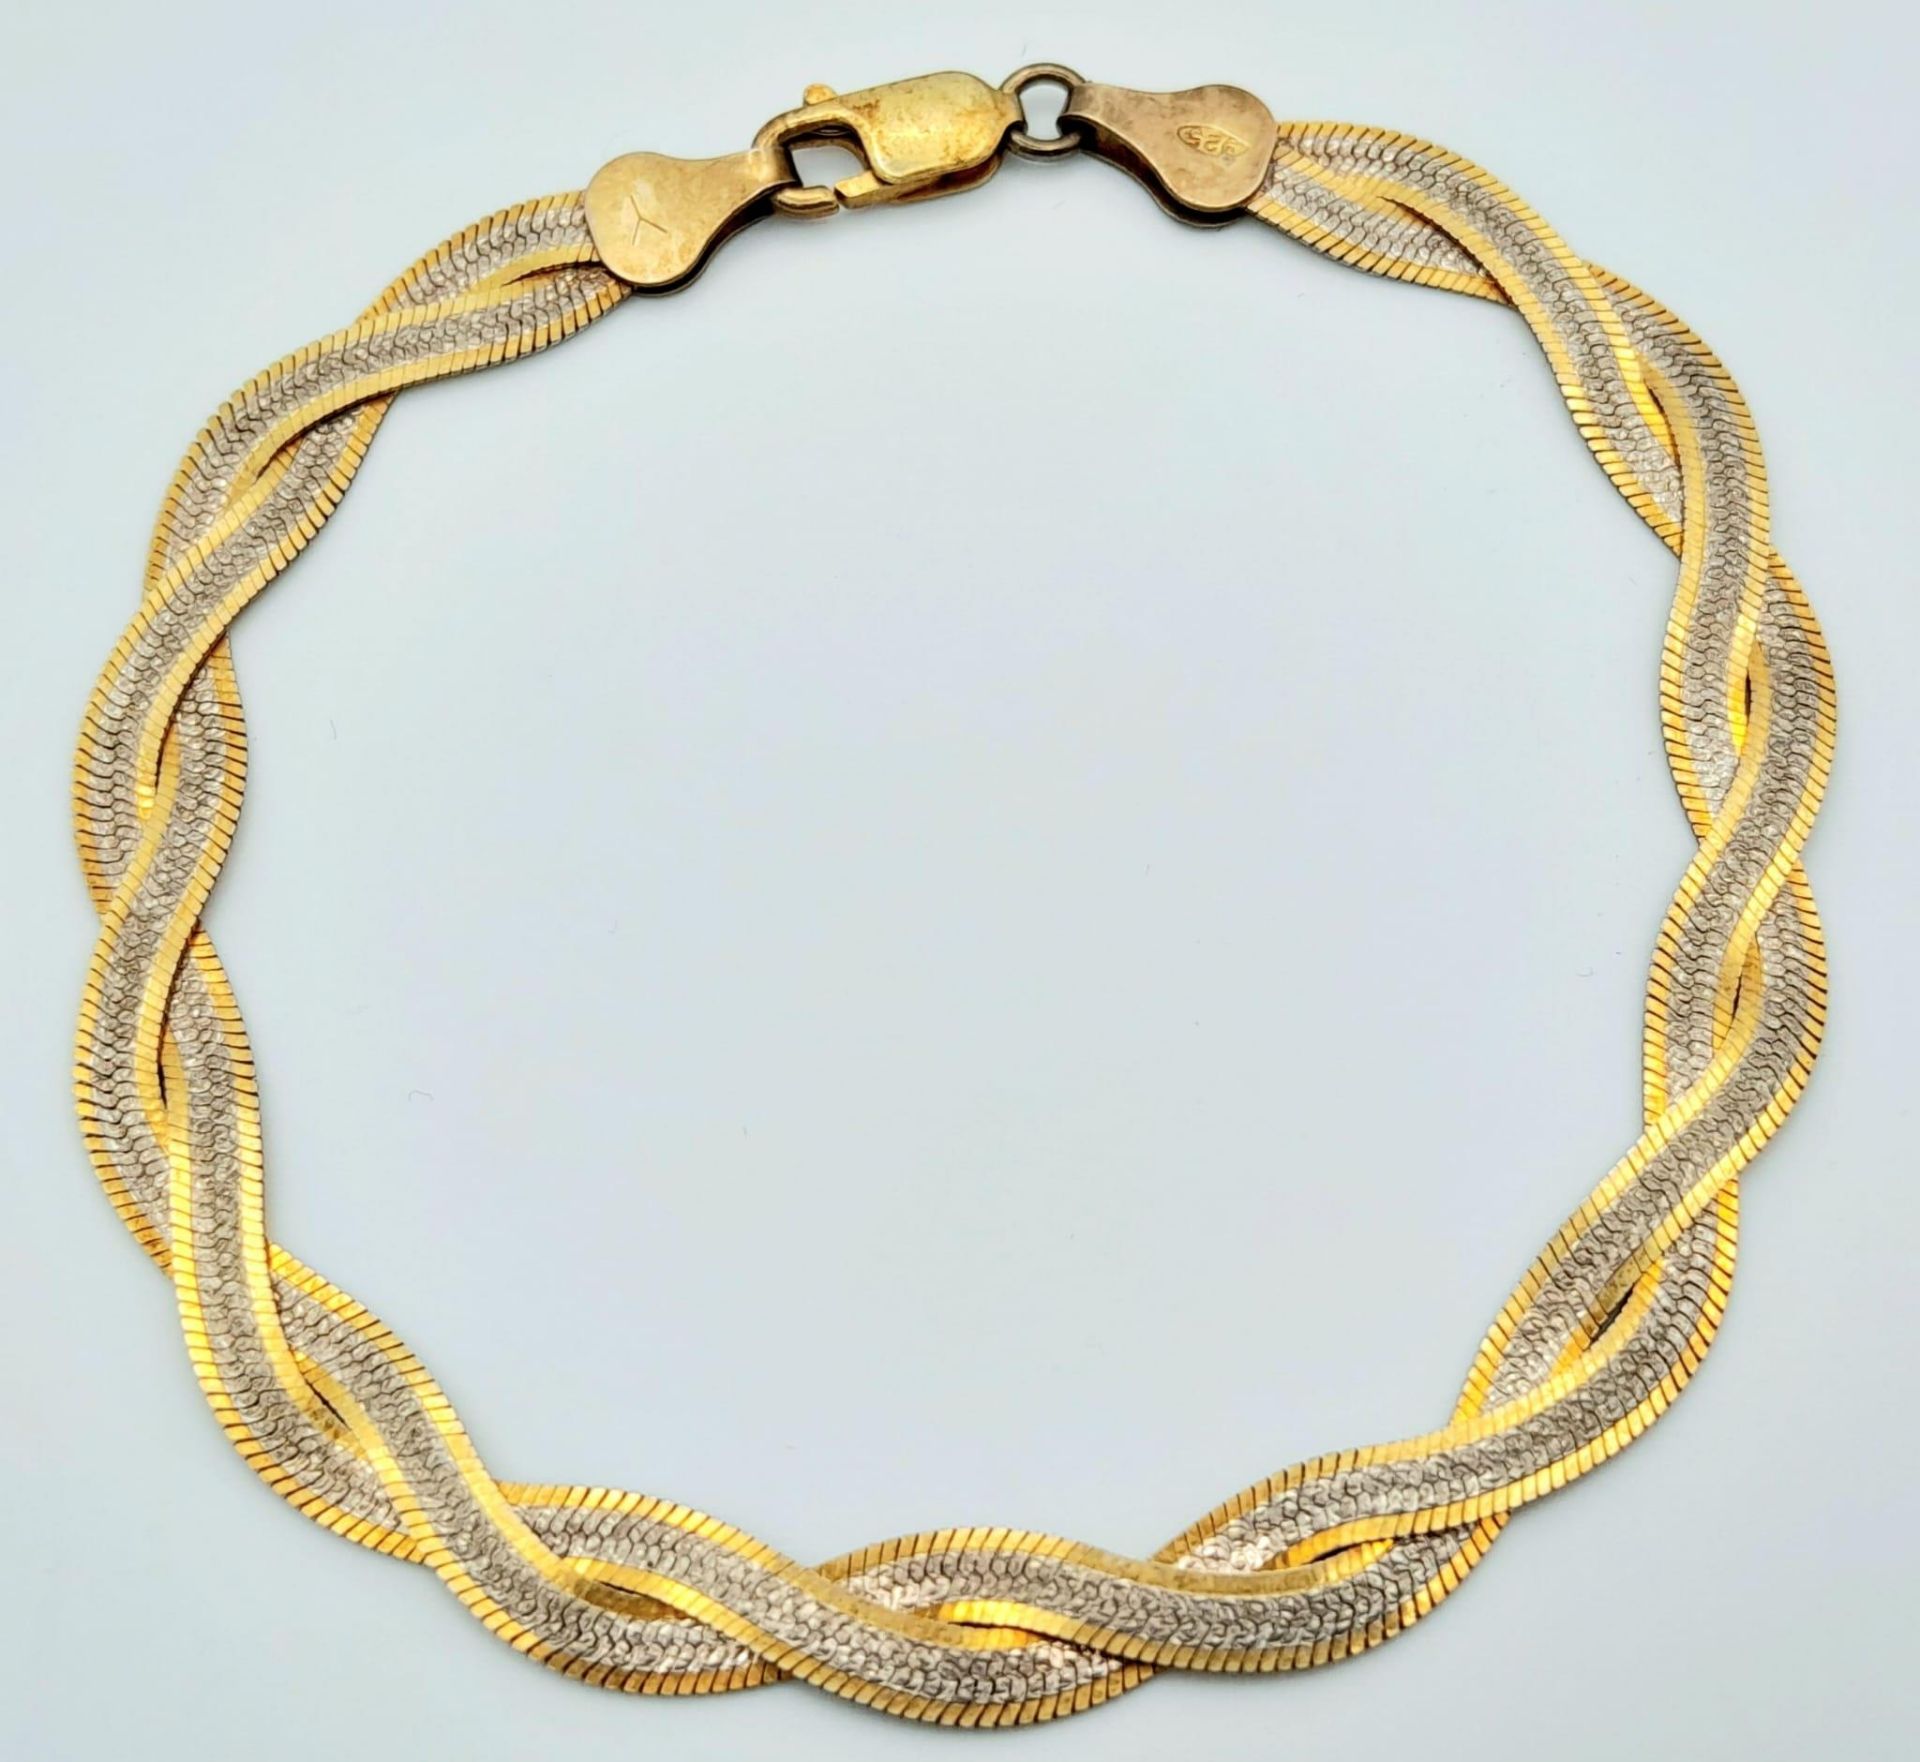 A 925 Sterling Silver Gilded and White Interwoven Flat Bracelet. 16cm. - Image 6 of 9